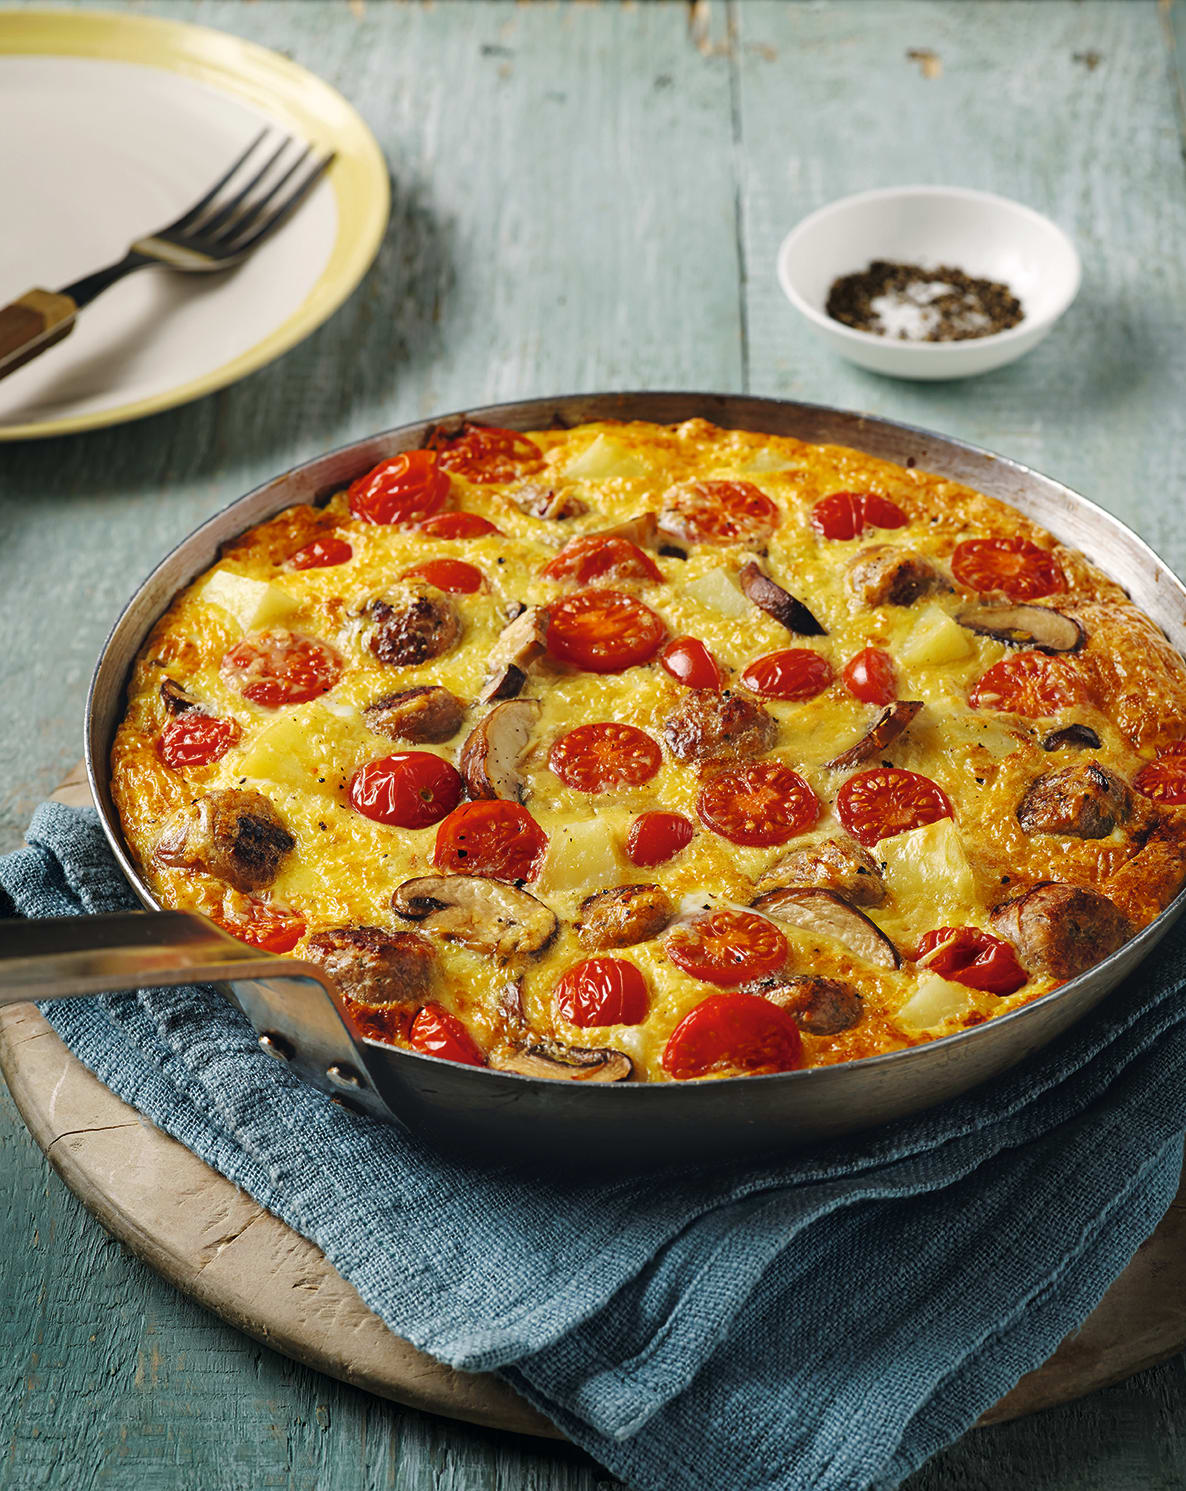 Photo of Breakfast frittata with tomatoes, mushrooms & sausages by WW